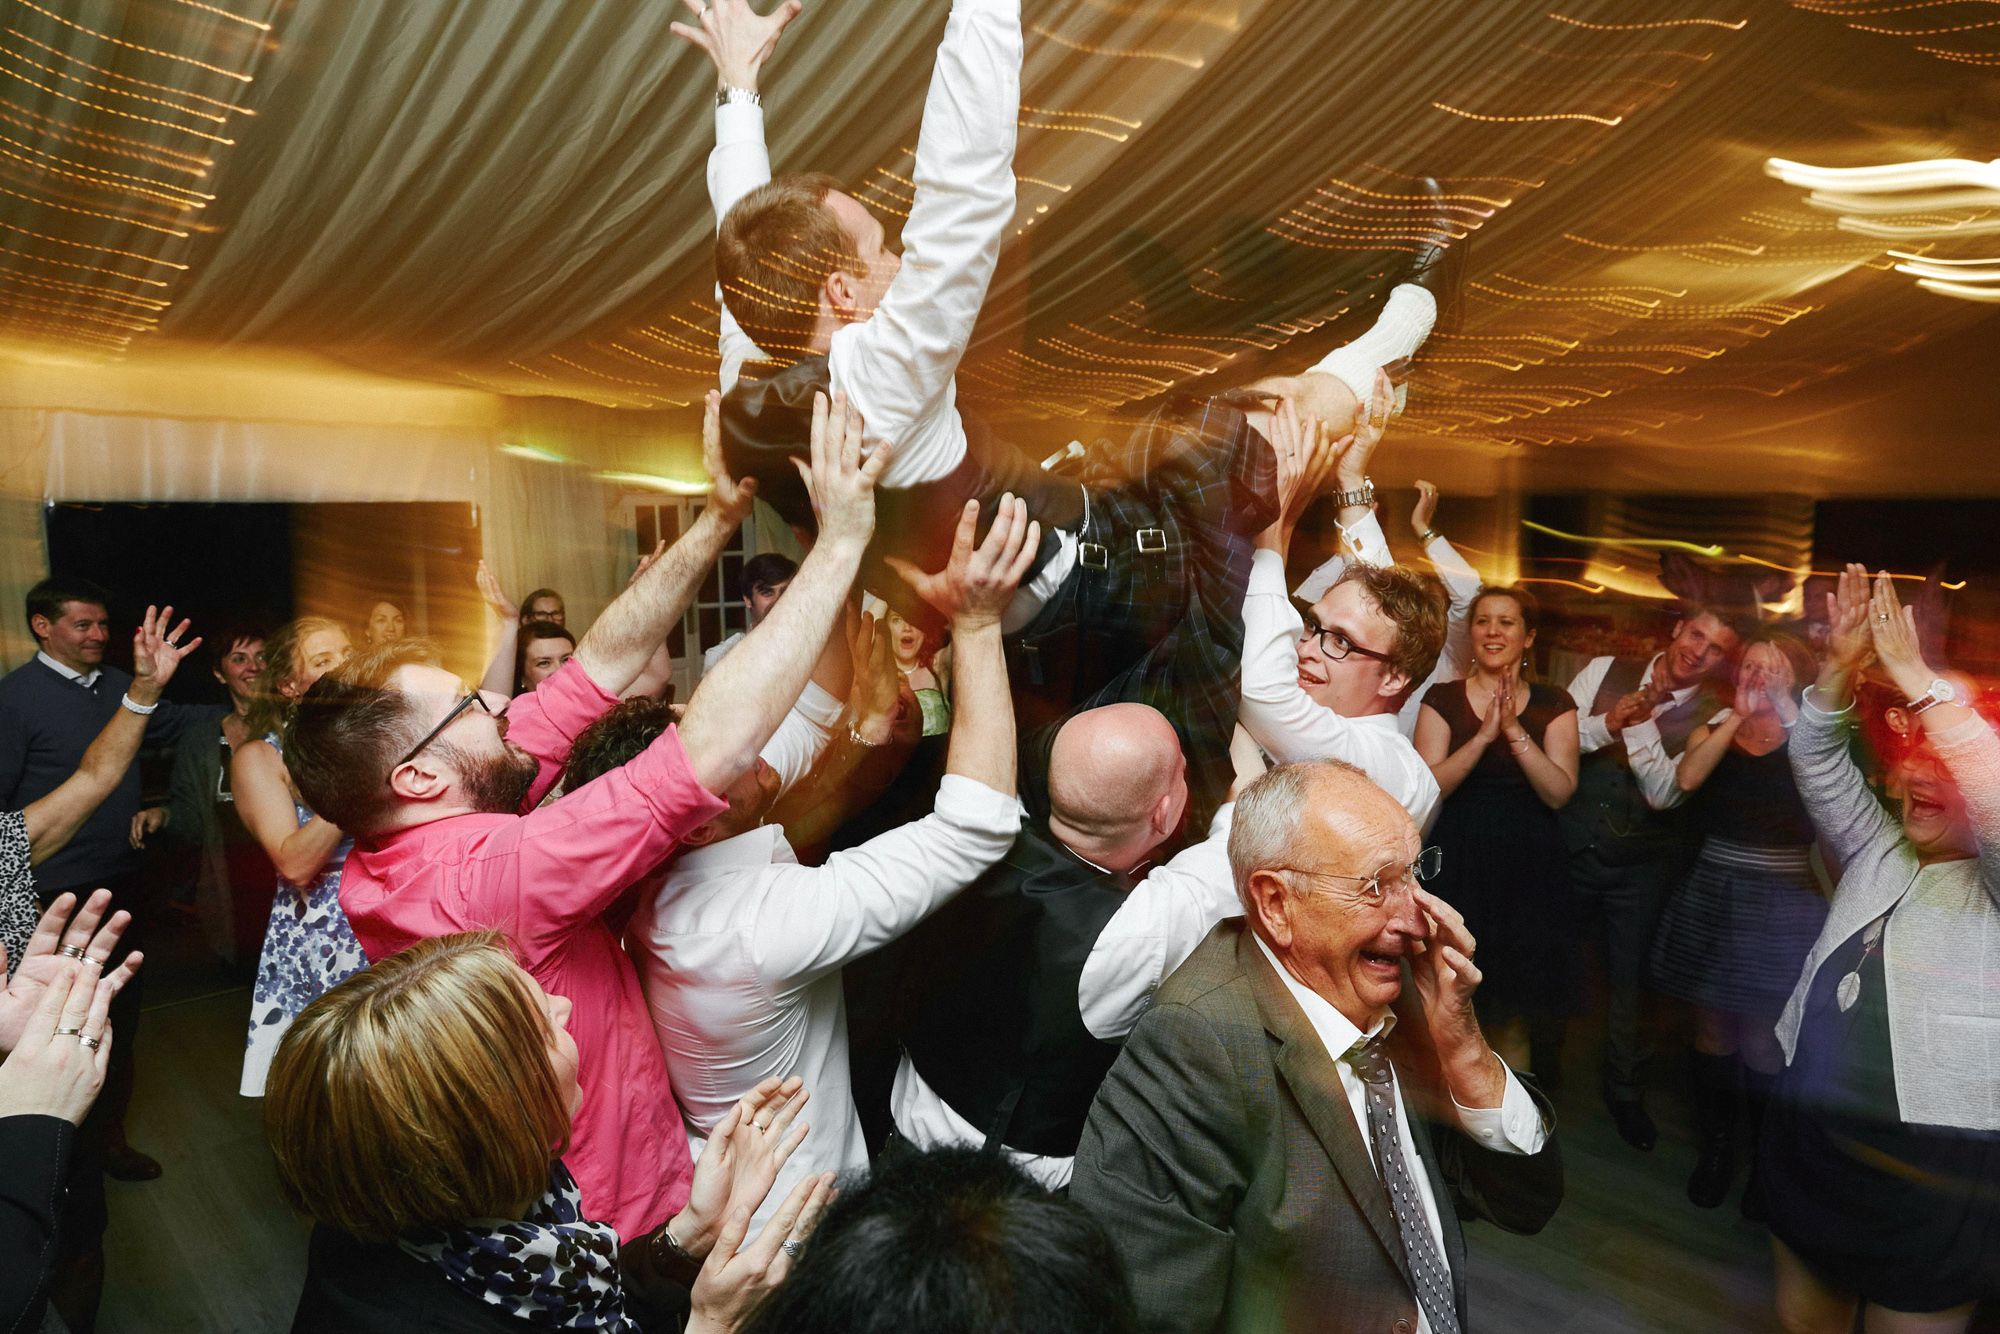 Dance party at French wedding